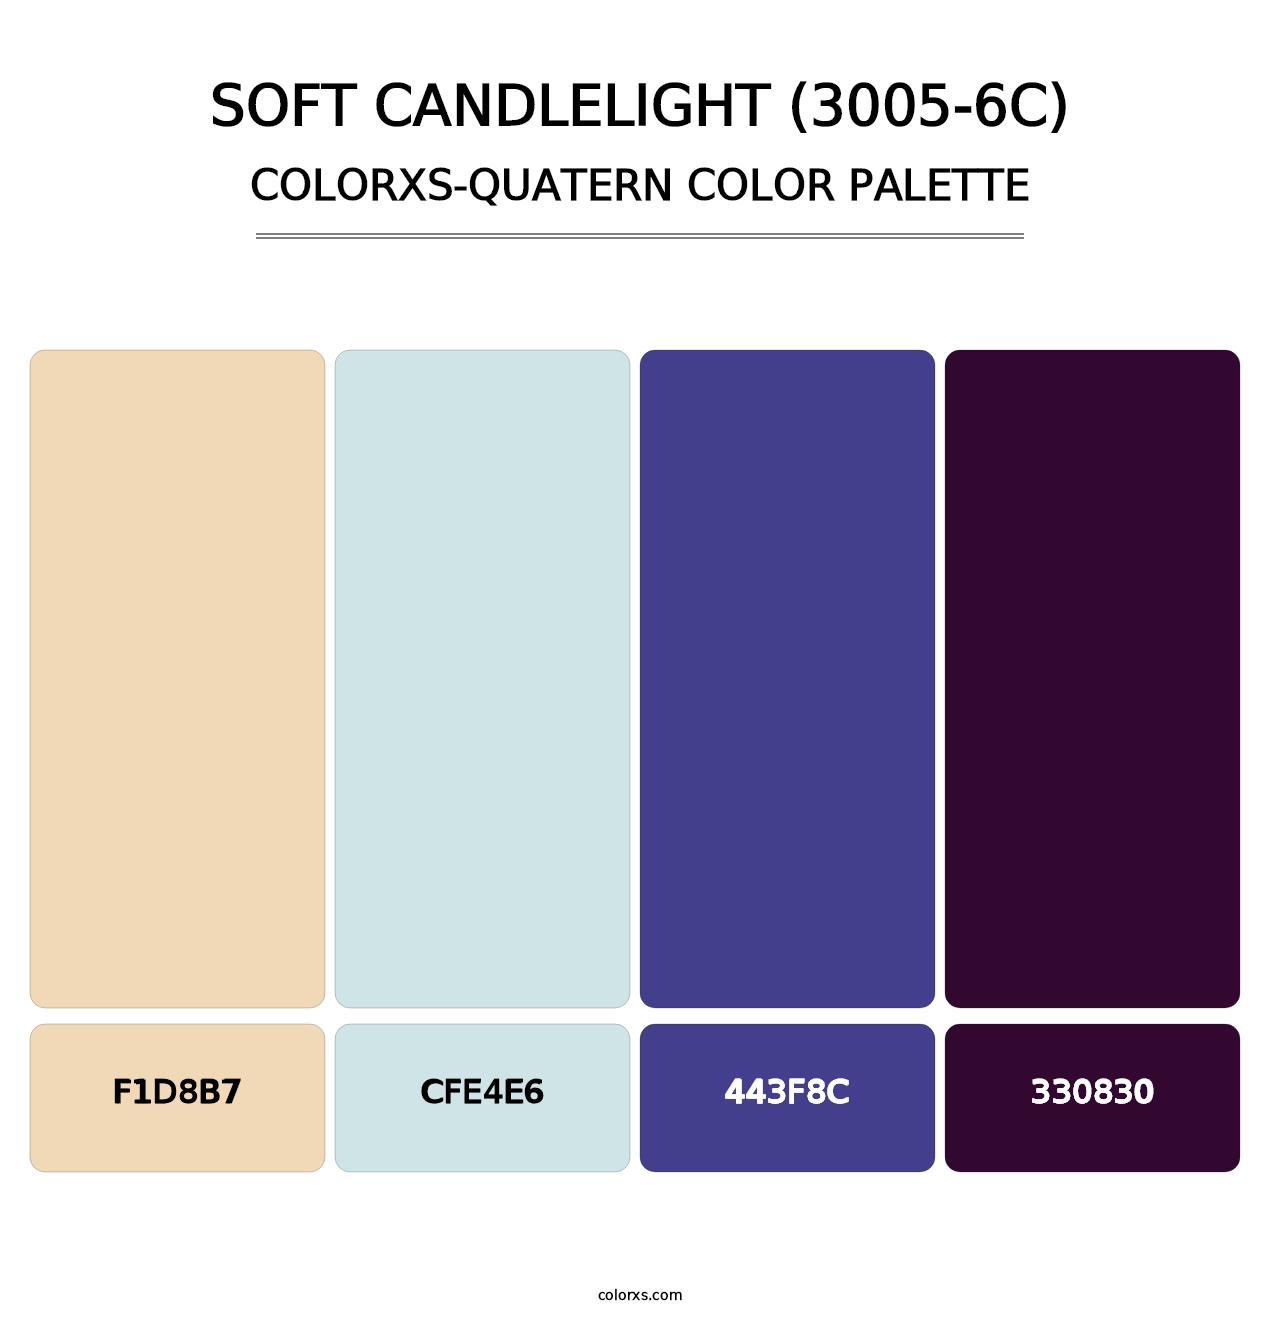 Soft Candlelight (3005-6C) - Colorxs Quatern Palette